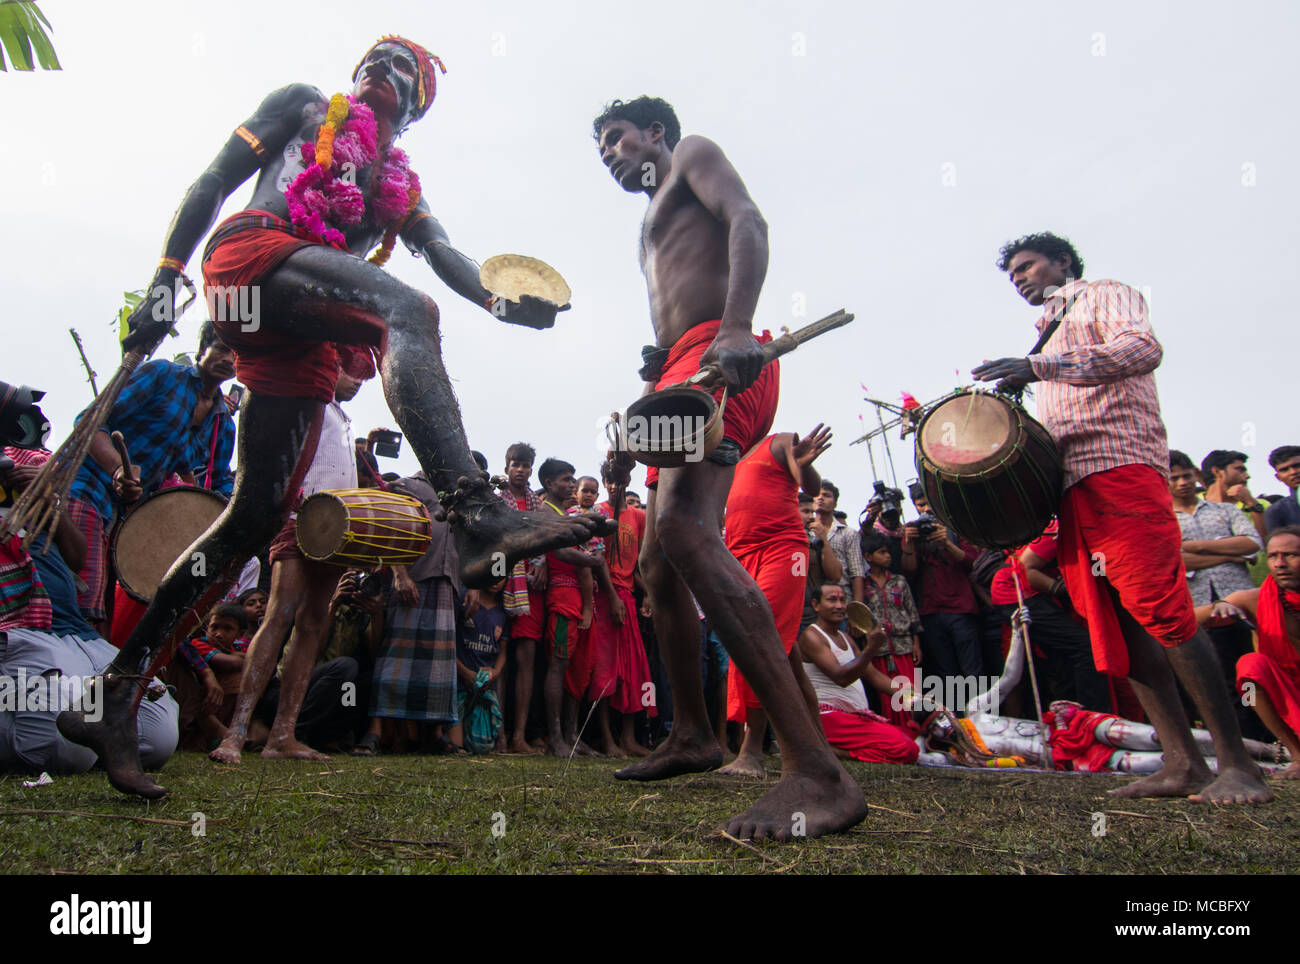 A group of Hindu devotees perform the rituals of Charak Puja festival on April 14, 2018 in Maulvibazar, Bangladesh. Stock Photo